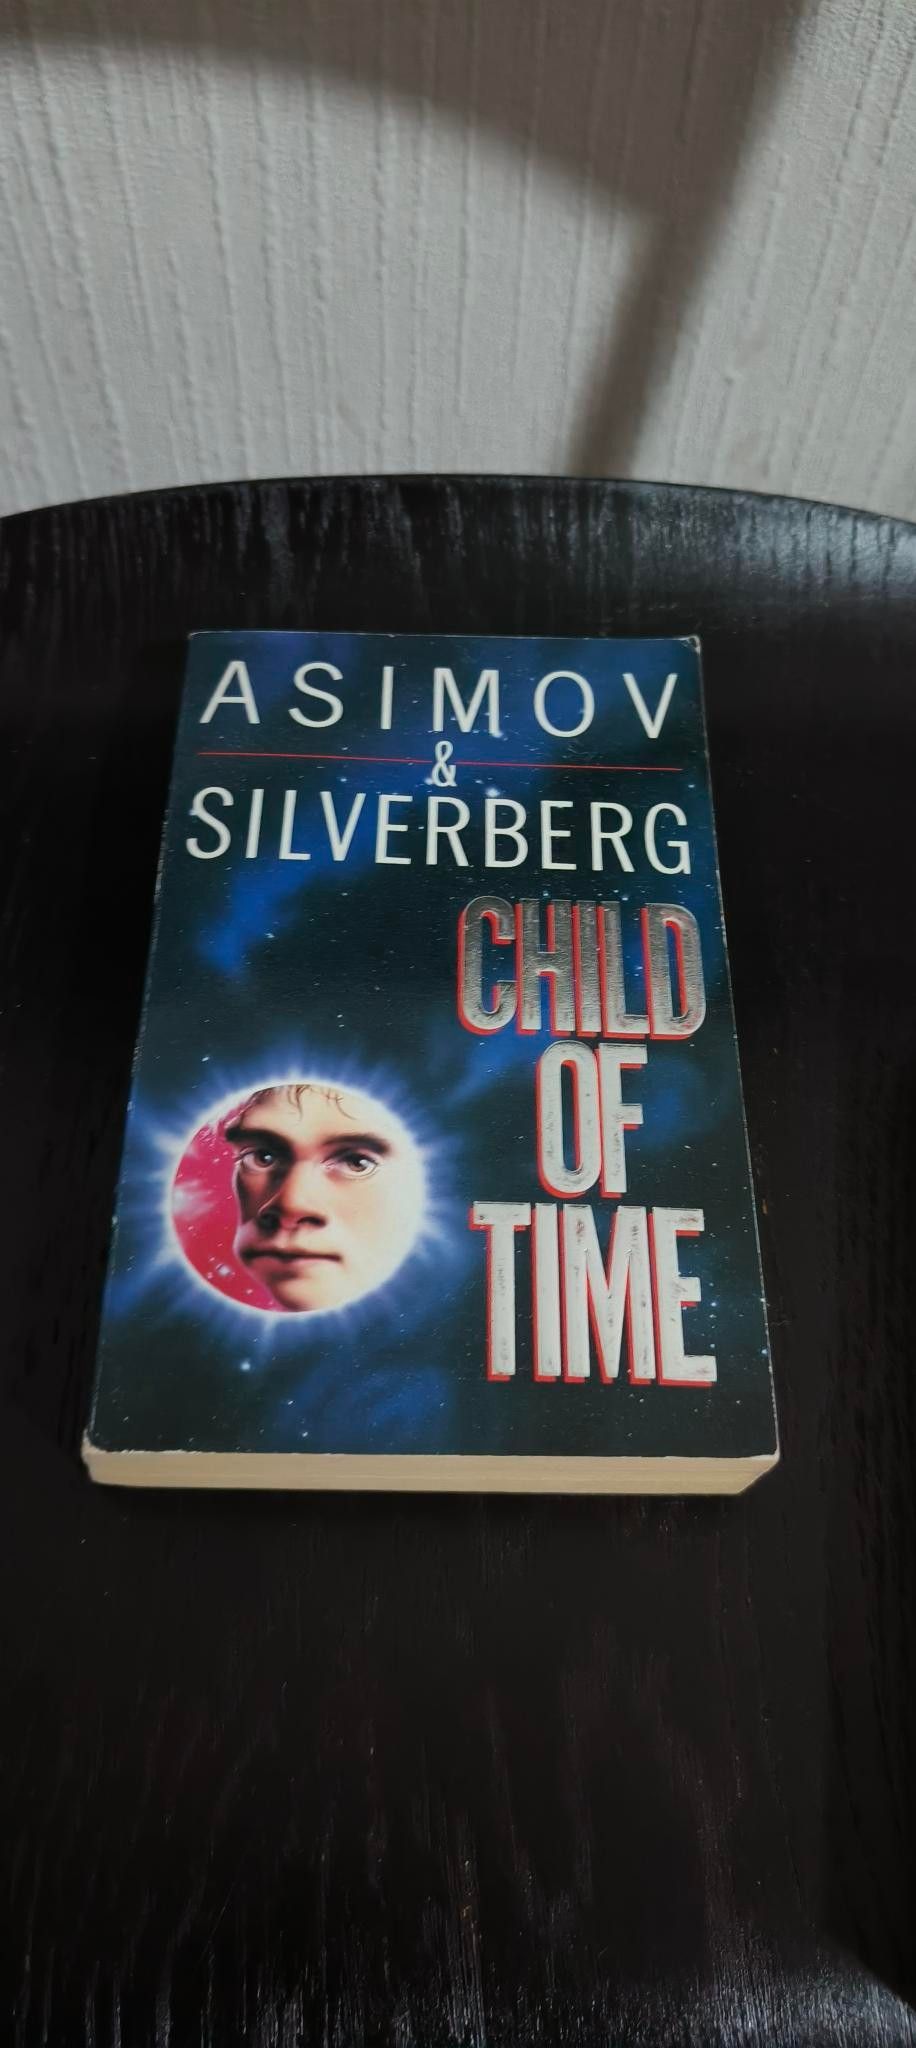 Asimov and Silverberg - Child of Time